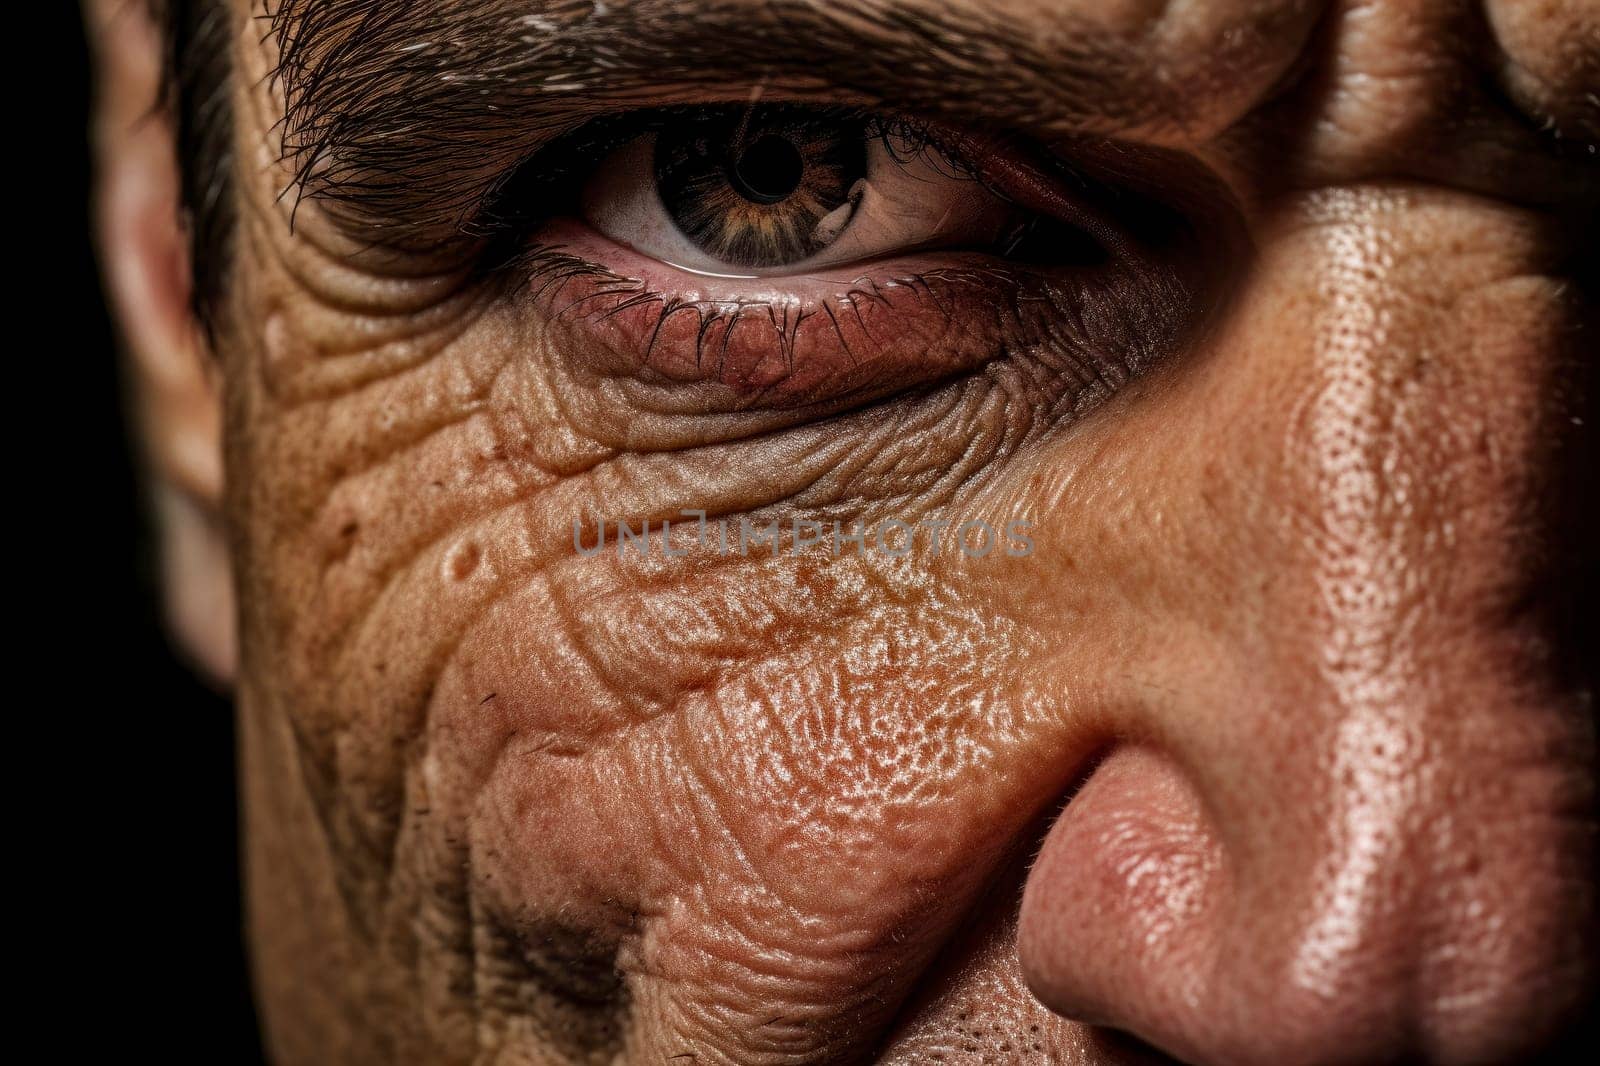 Powerful Gaze: Close-up of a Strong Man's Eye by pippocarlot